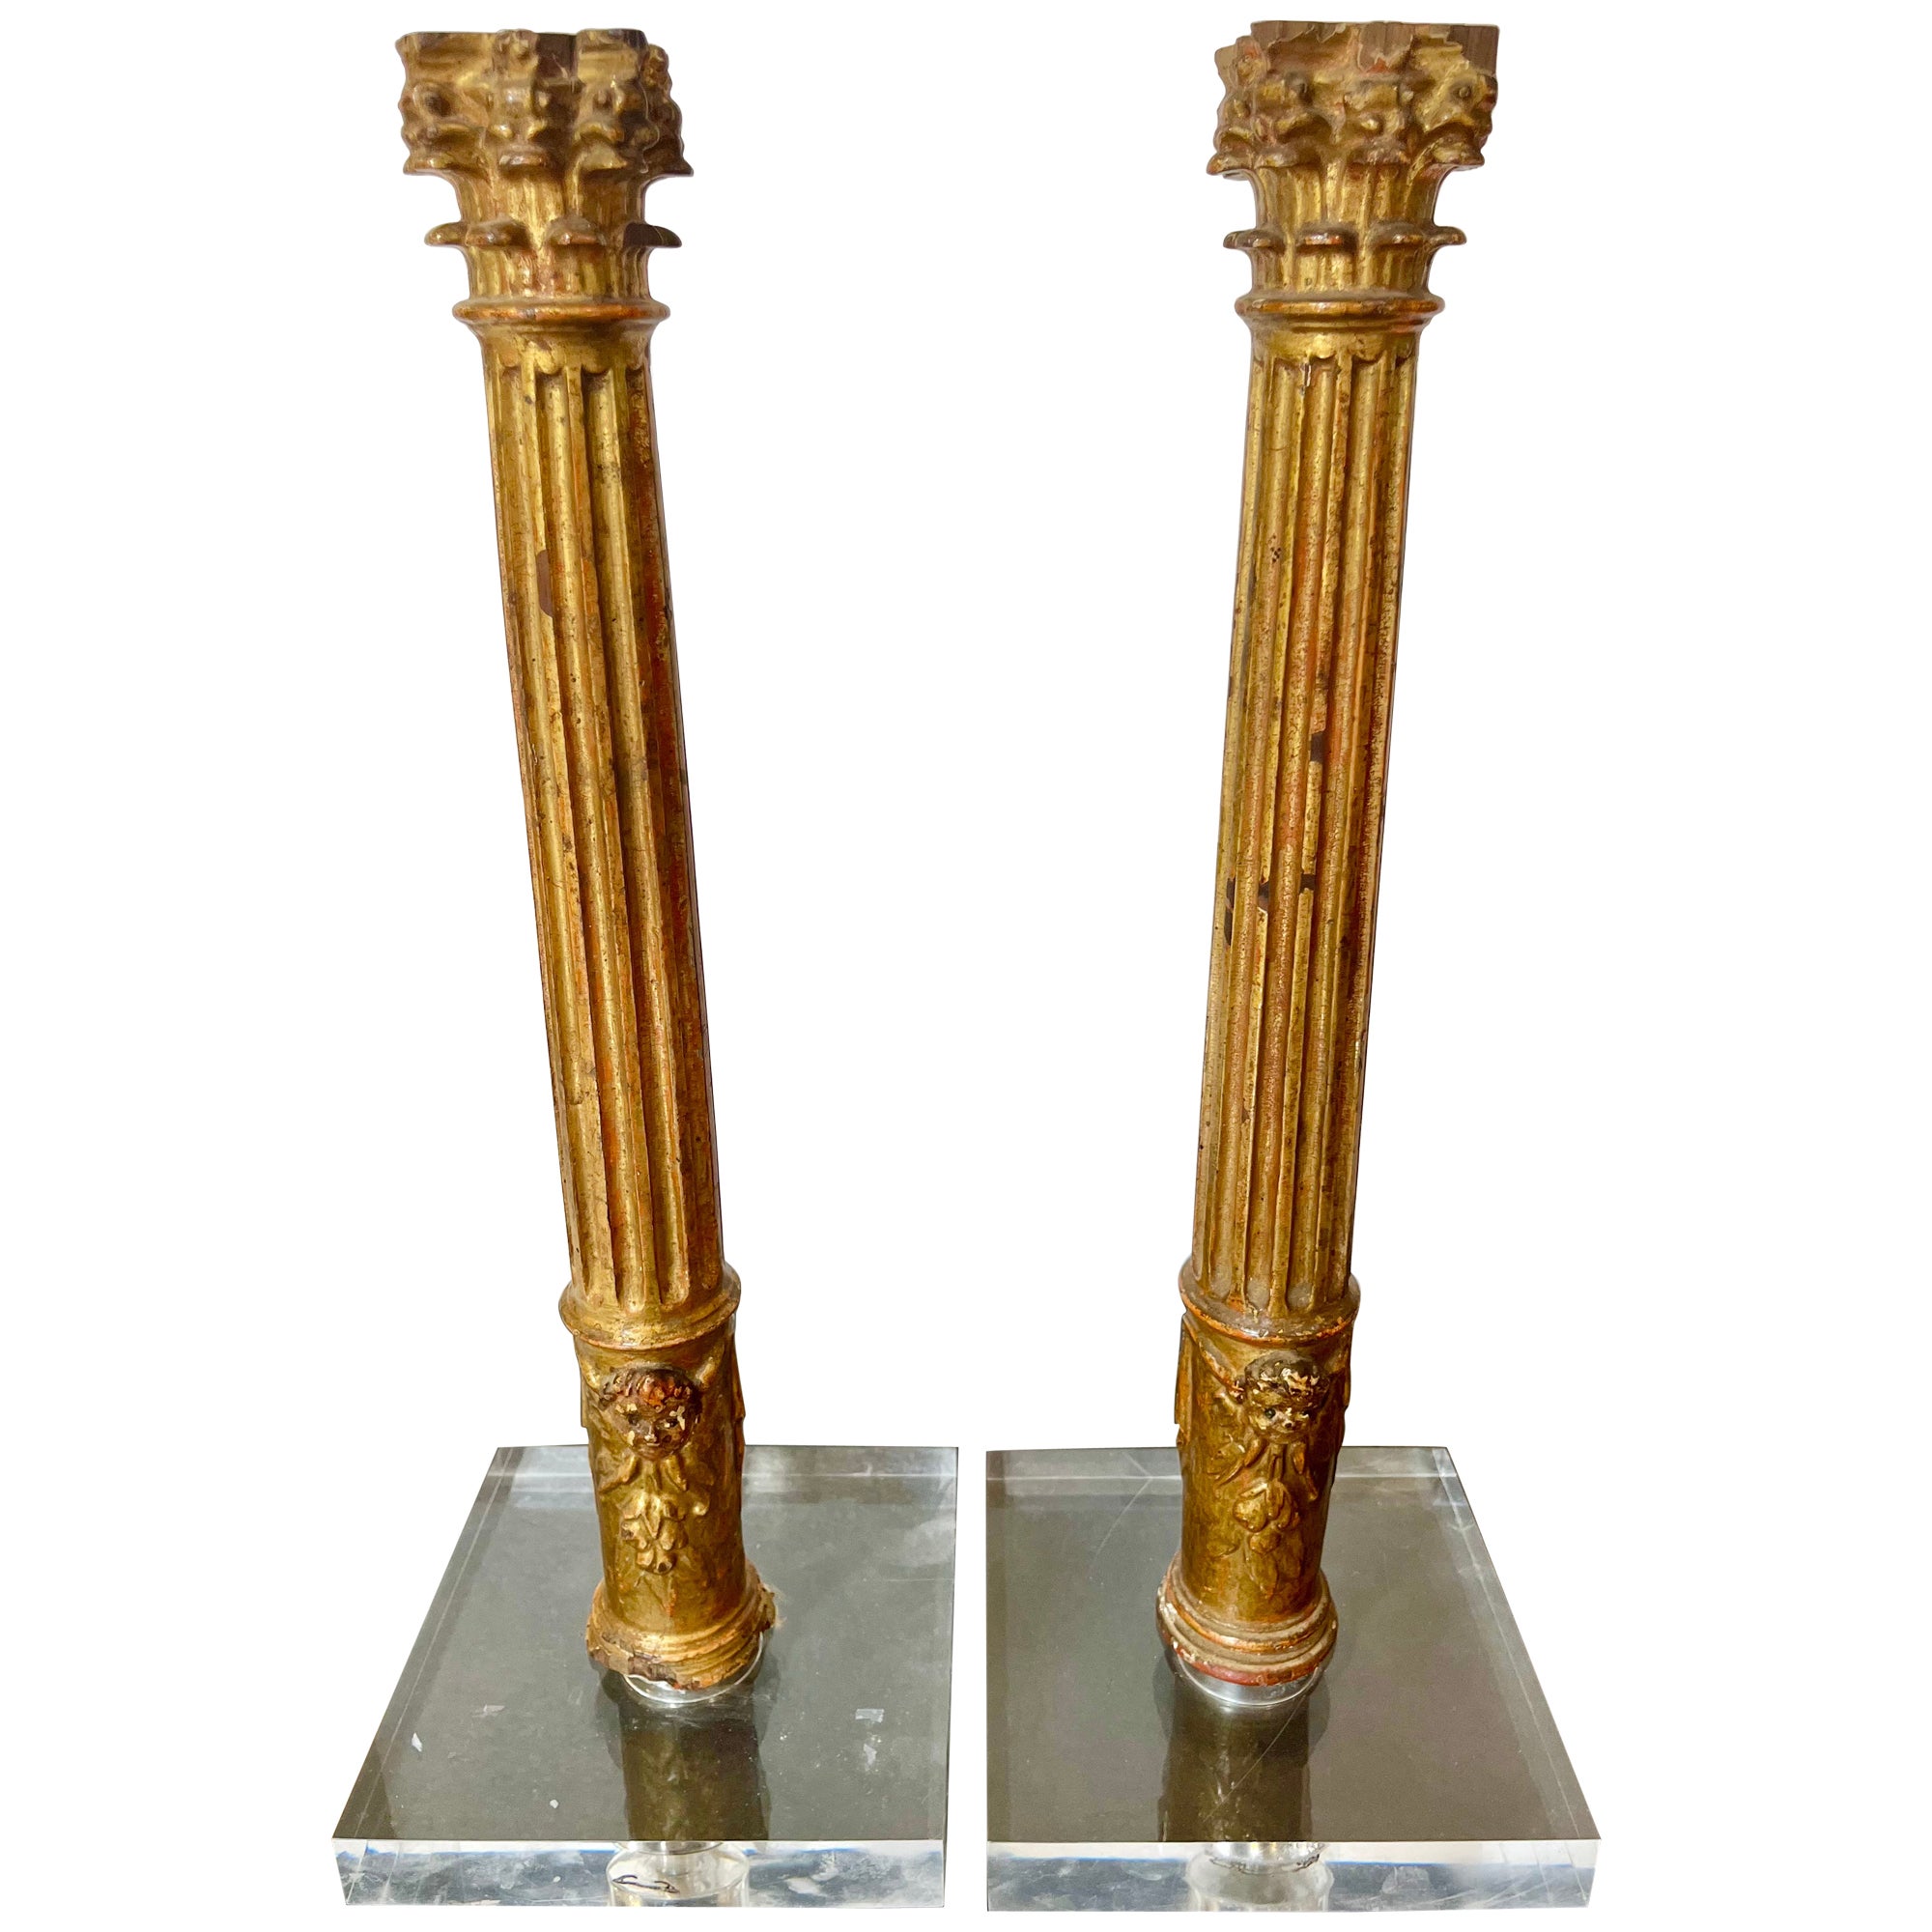 Pair of Giltwood Architectural Corinthian Columns in Grand Tour Style 